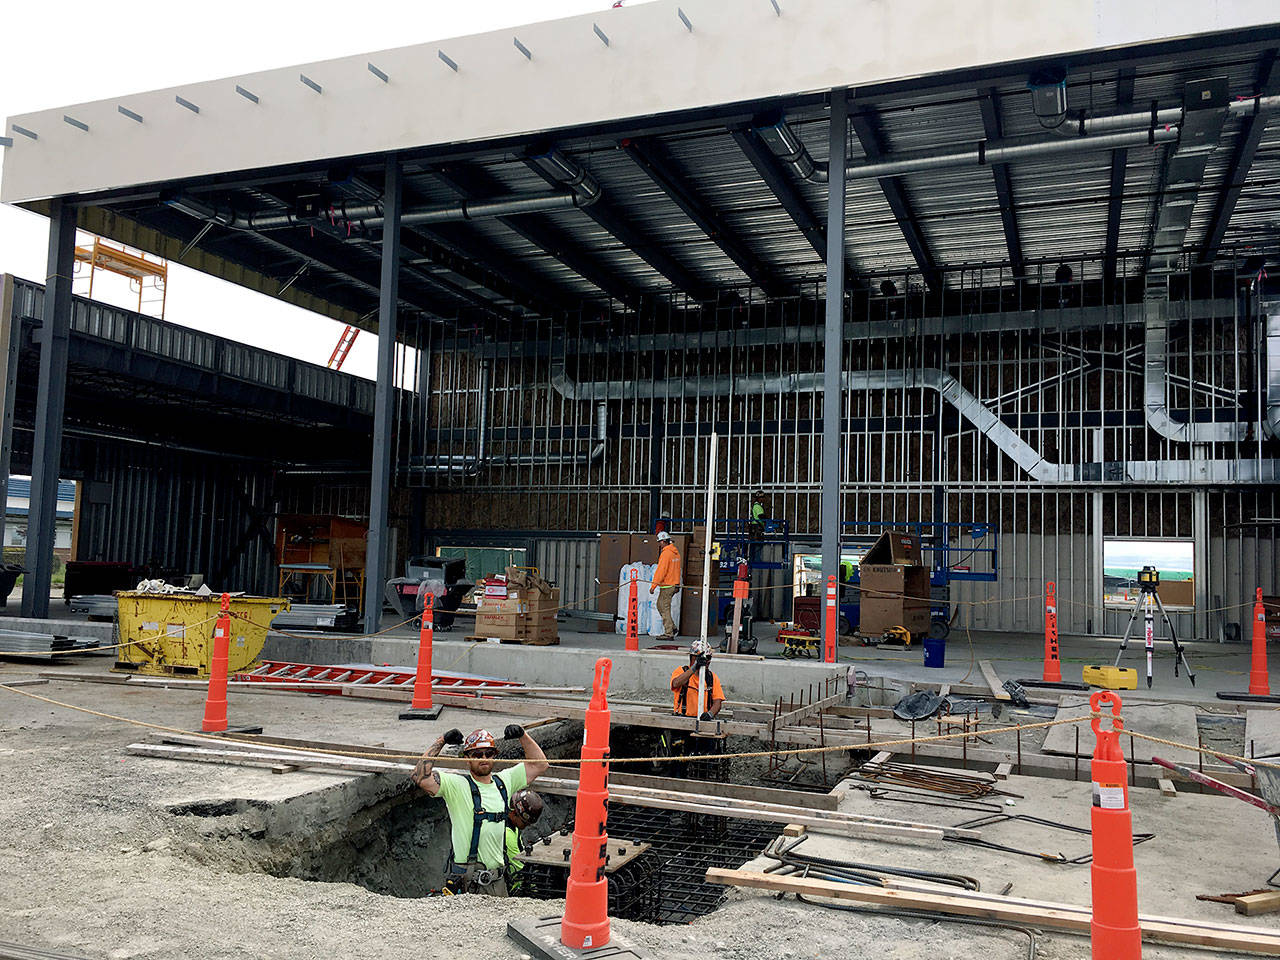 The passenger terminal at Paine Field in Everett is taking shape. (Janice Podsada / The Herald)